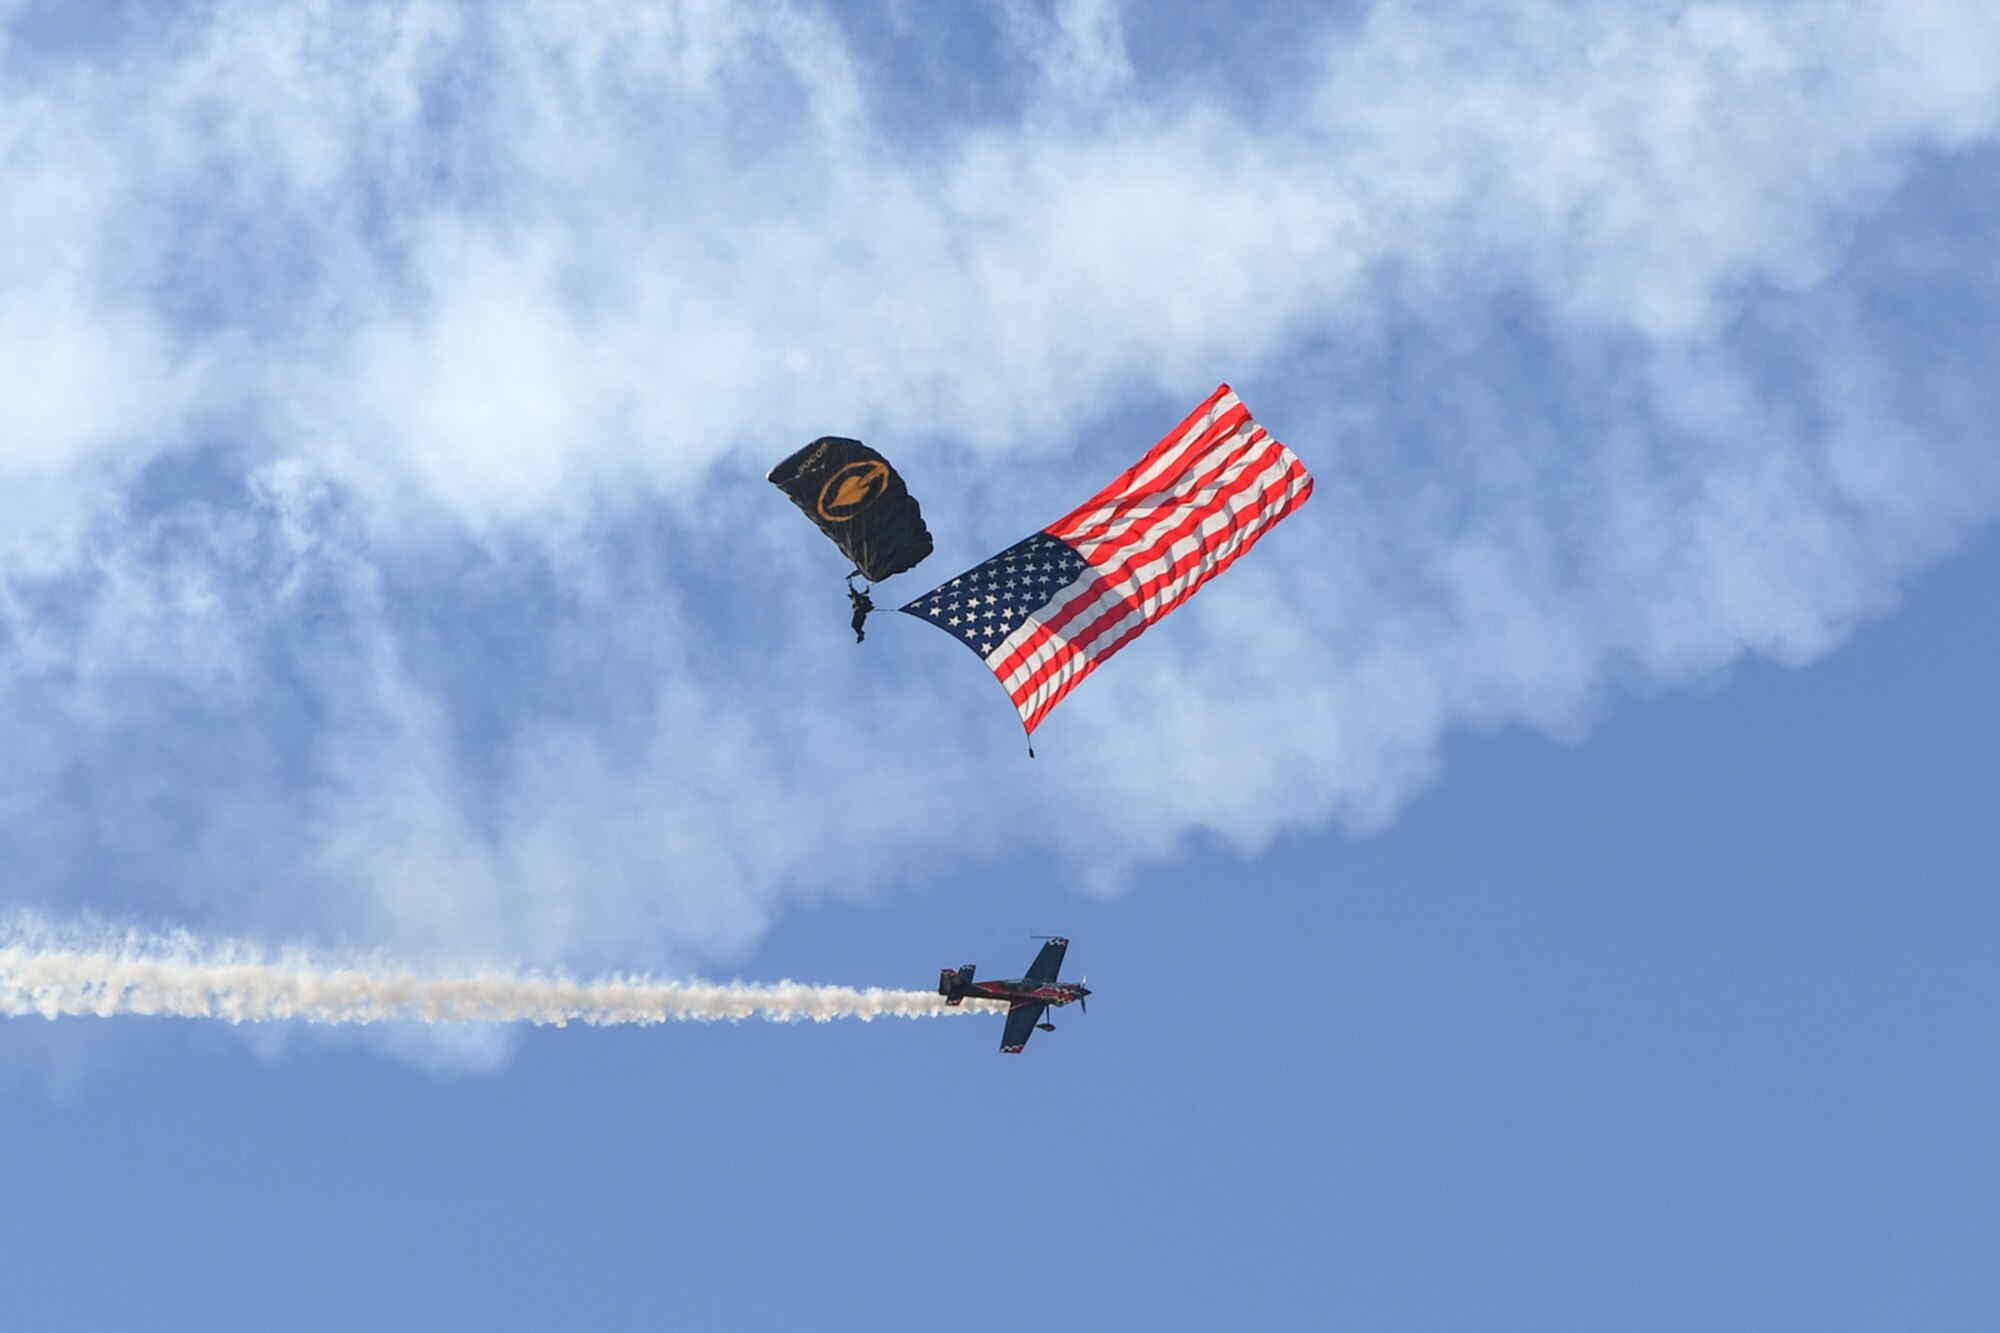 A U.S. Special Operations Command The Para-Commandos parachute demonstration team member performs a National Anthem flag jum during the Warriors Over the Wasatch Air and Space Show June 24, 2018, at Hill Air Force Base, Utah. The Para-Commandos are comprised of active duty special operators, such as Army Special Forces, Army Rangers, Navy SEALs, Air Force Combat Controllers and Marine Raiders. (U.S. Air Force photo by Cynthia Griggs)